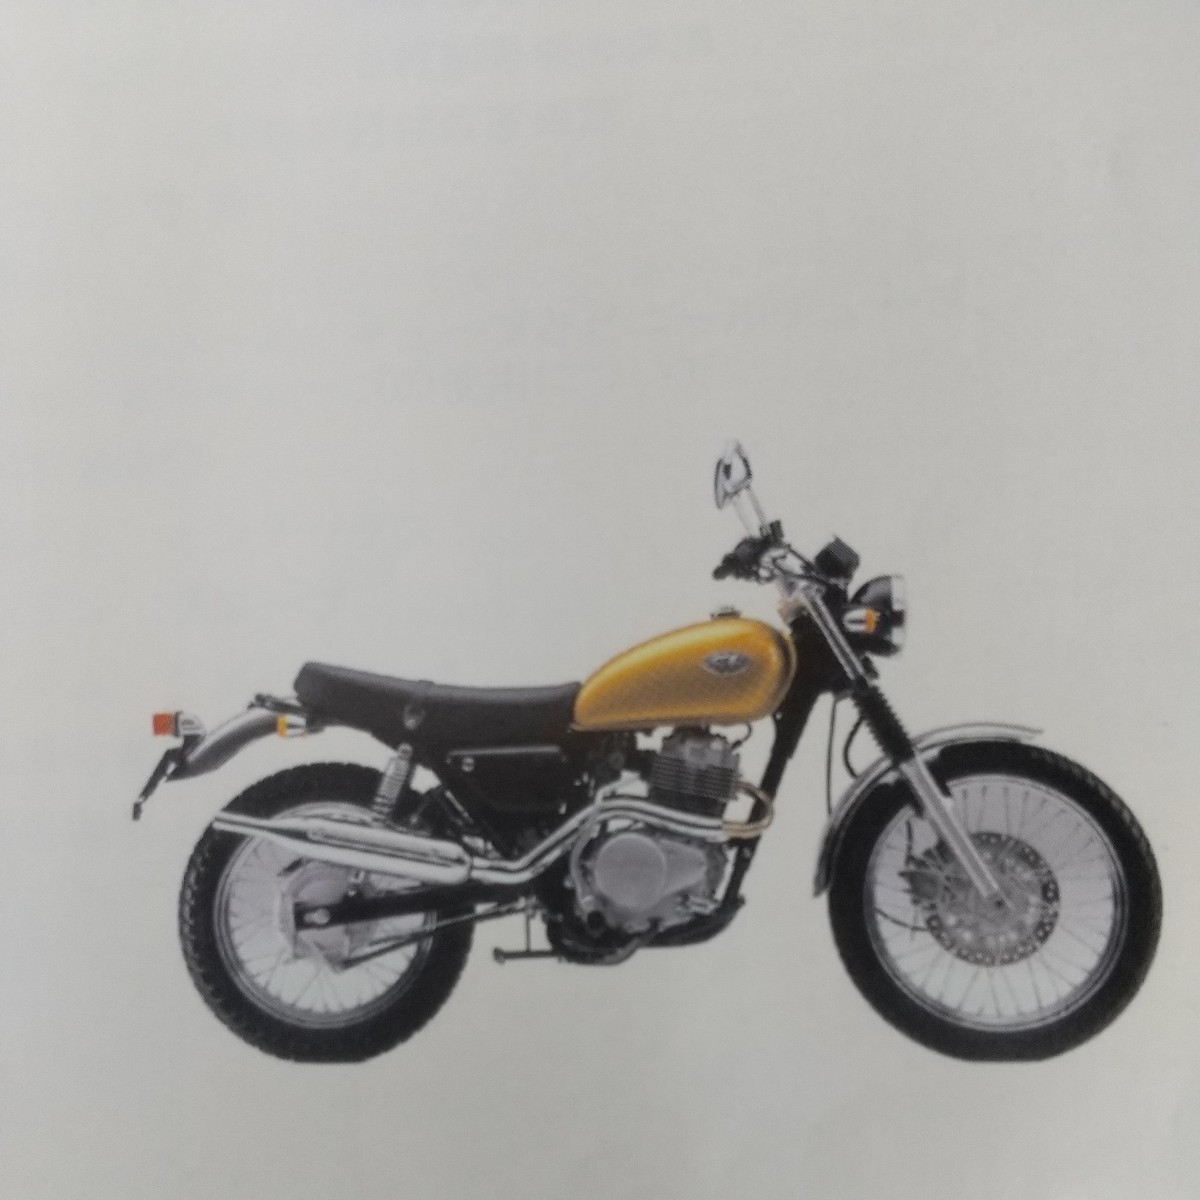 CB400SS NC41 CL400 NC38 フロントフォーク　フロントフォークブーツ　純正未使用品　左右セット